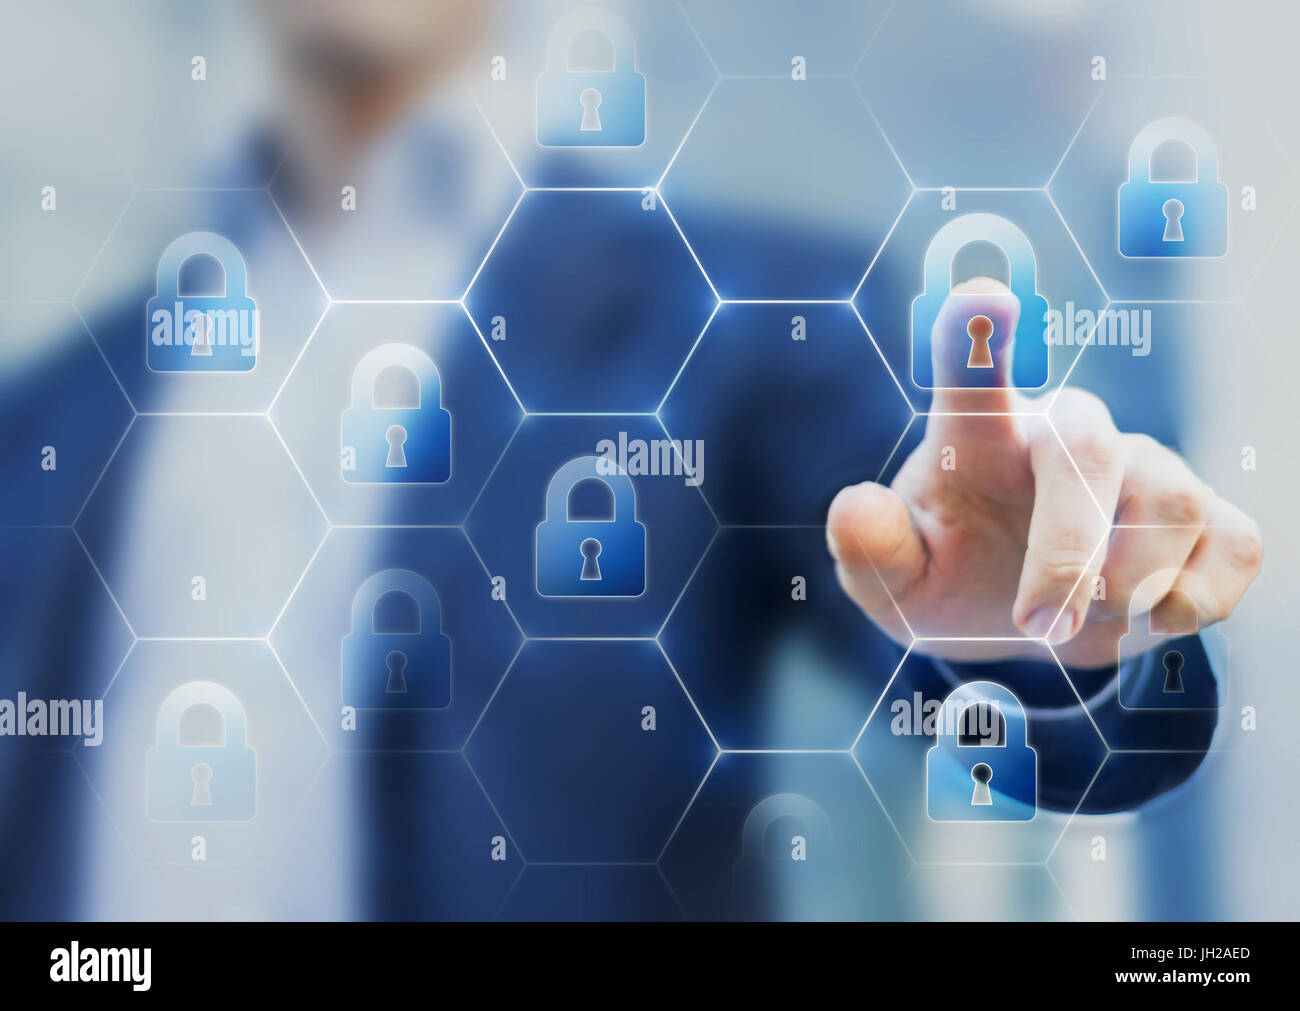 Security consultant touching a network of lock icons on a virtual screen, symbol of cybersecurity on internet and protection against cyber crime Stock Photo